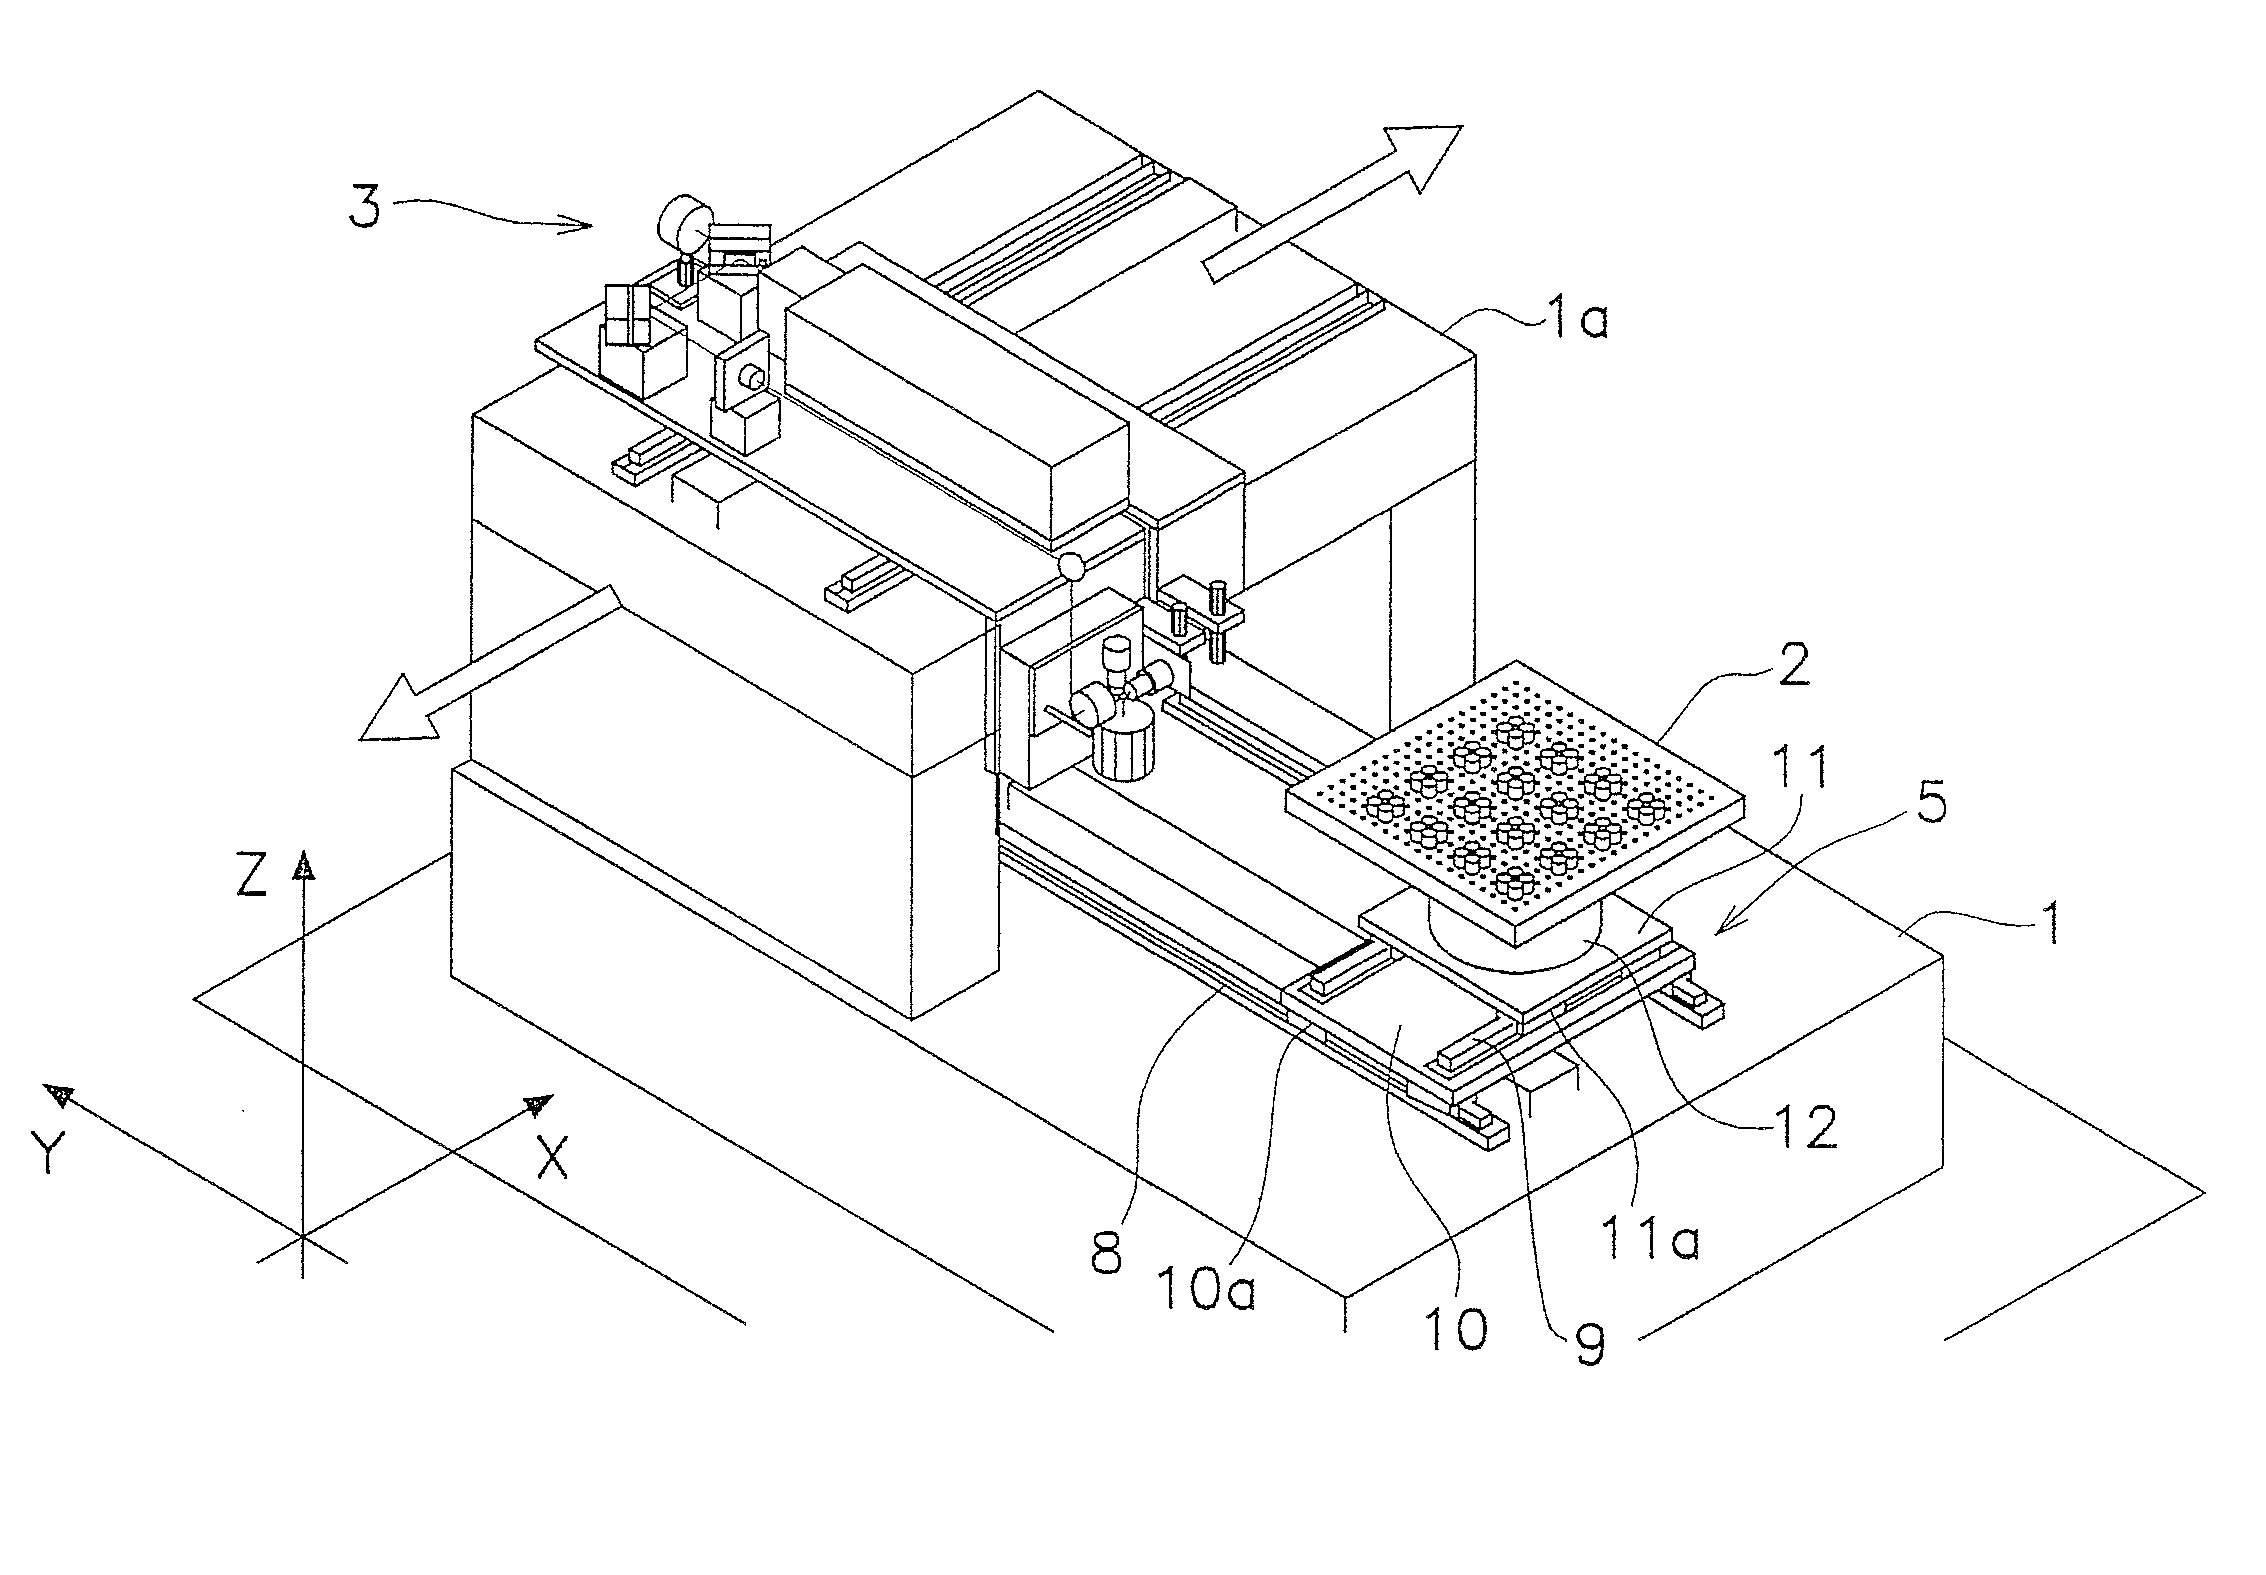 Glass substrate processing device using laser beam